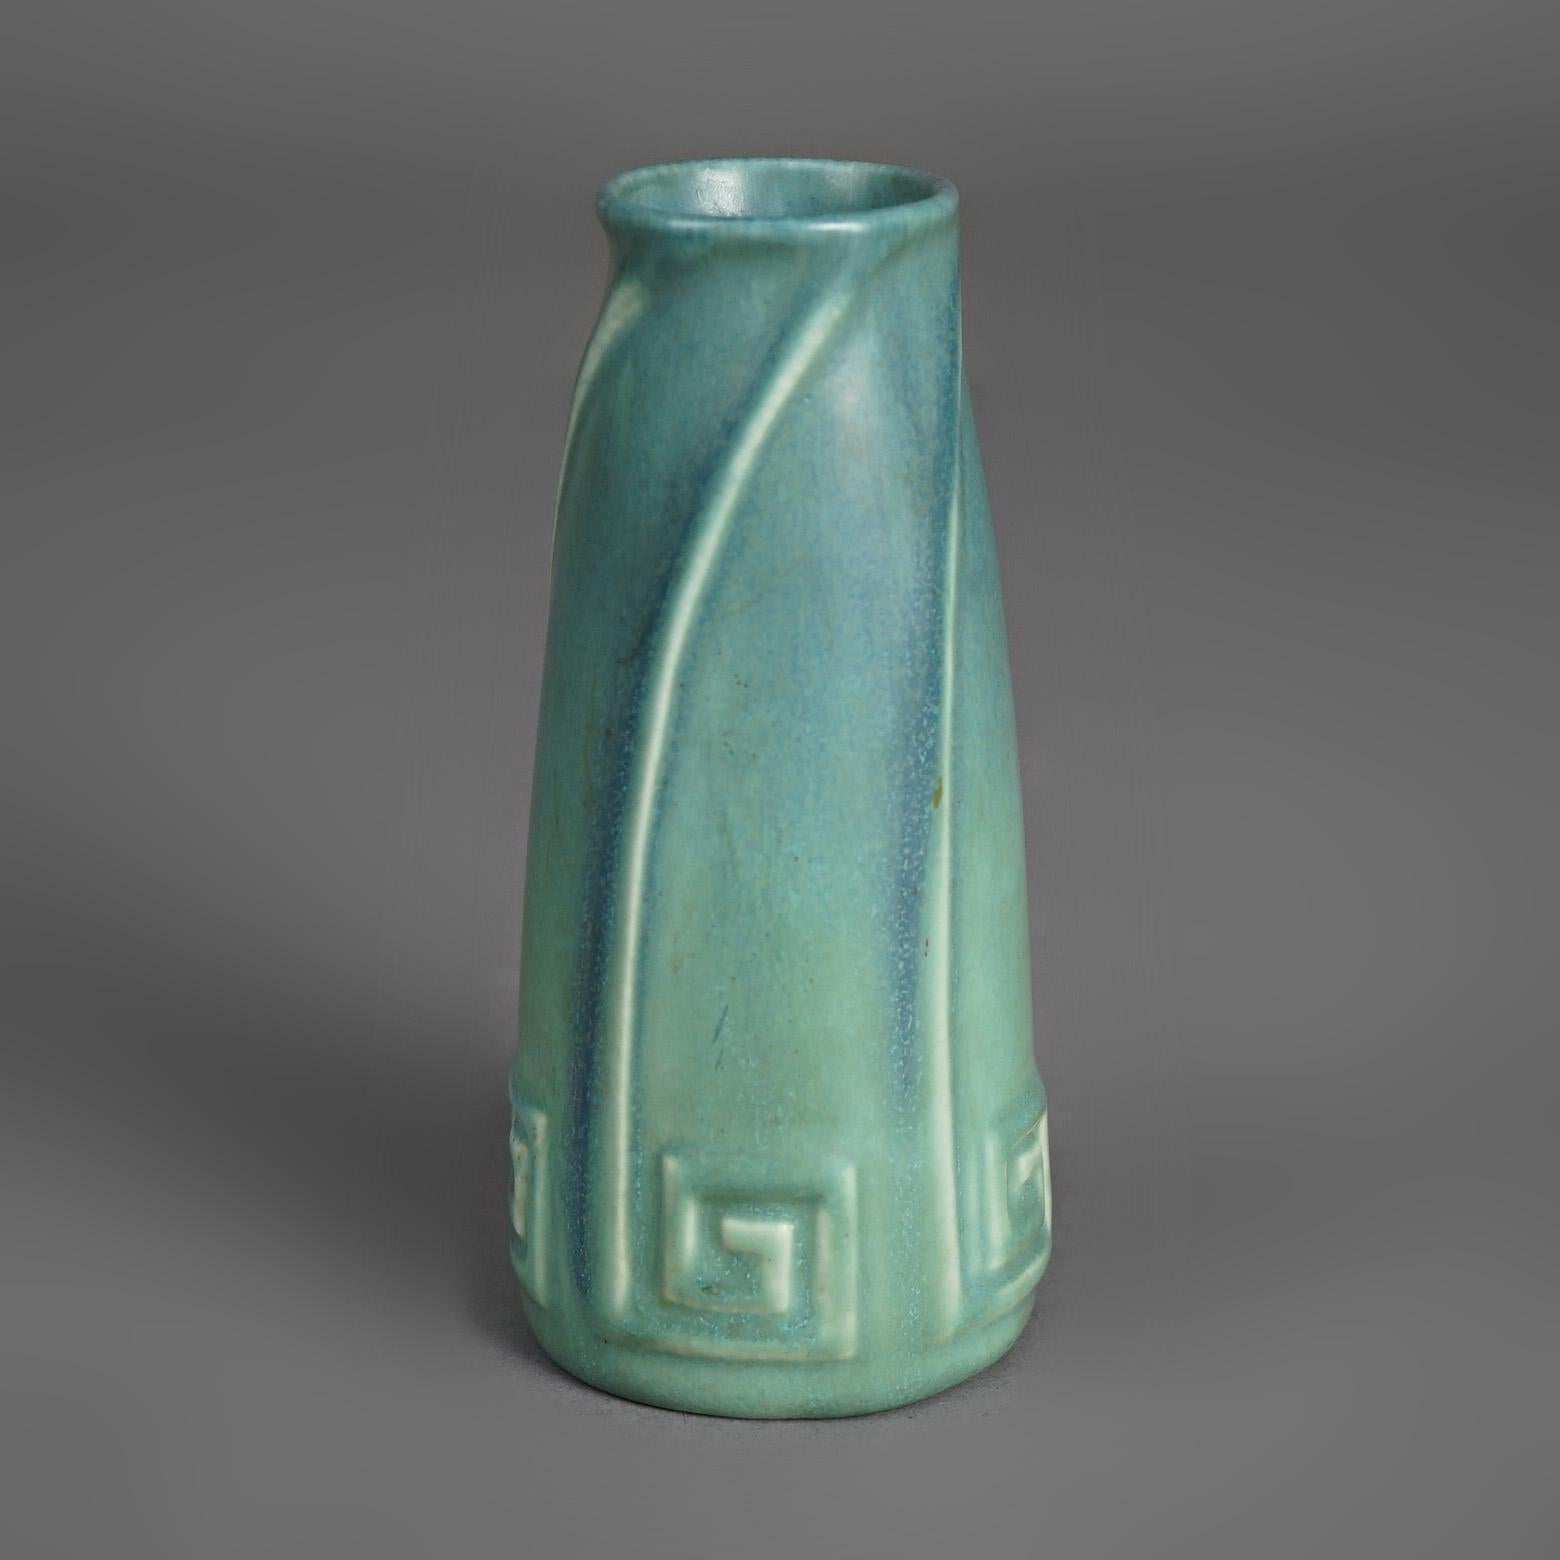 Antique Arts & Crafts Rookwood Matt Glazed Art Pottery Vase C1923 In Good Condition For Sale In Big Flats, NY